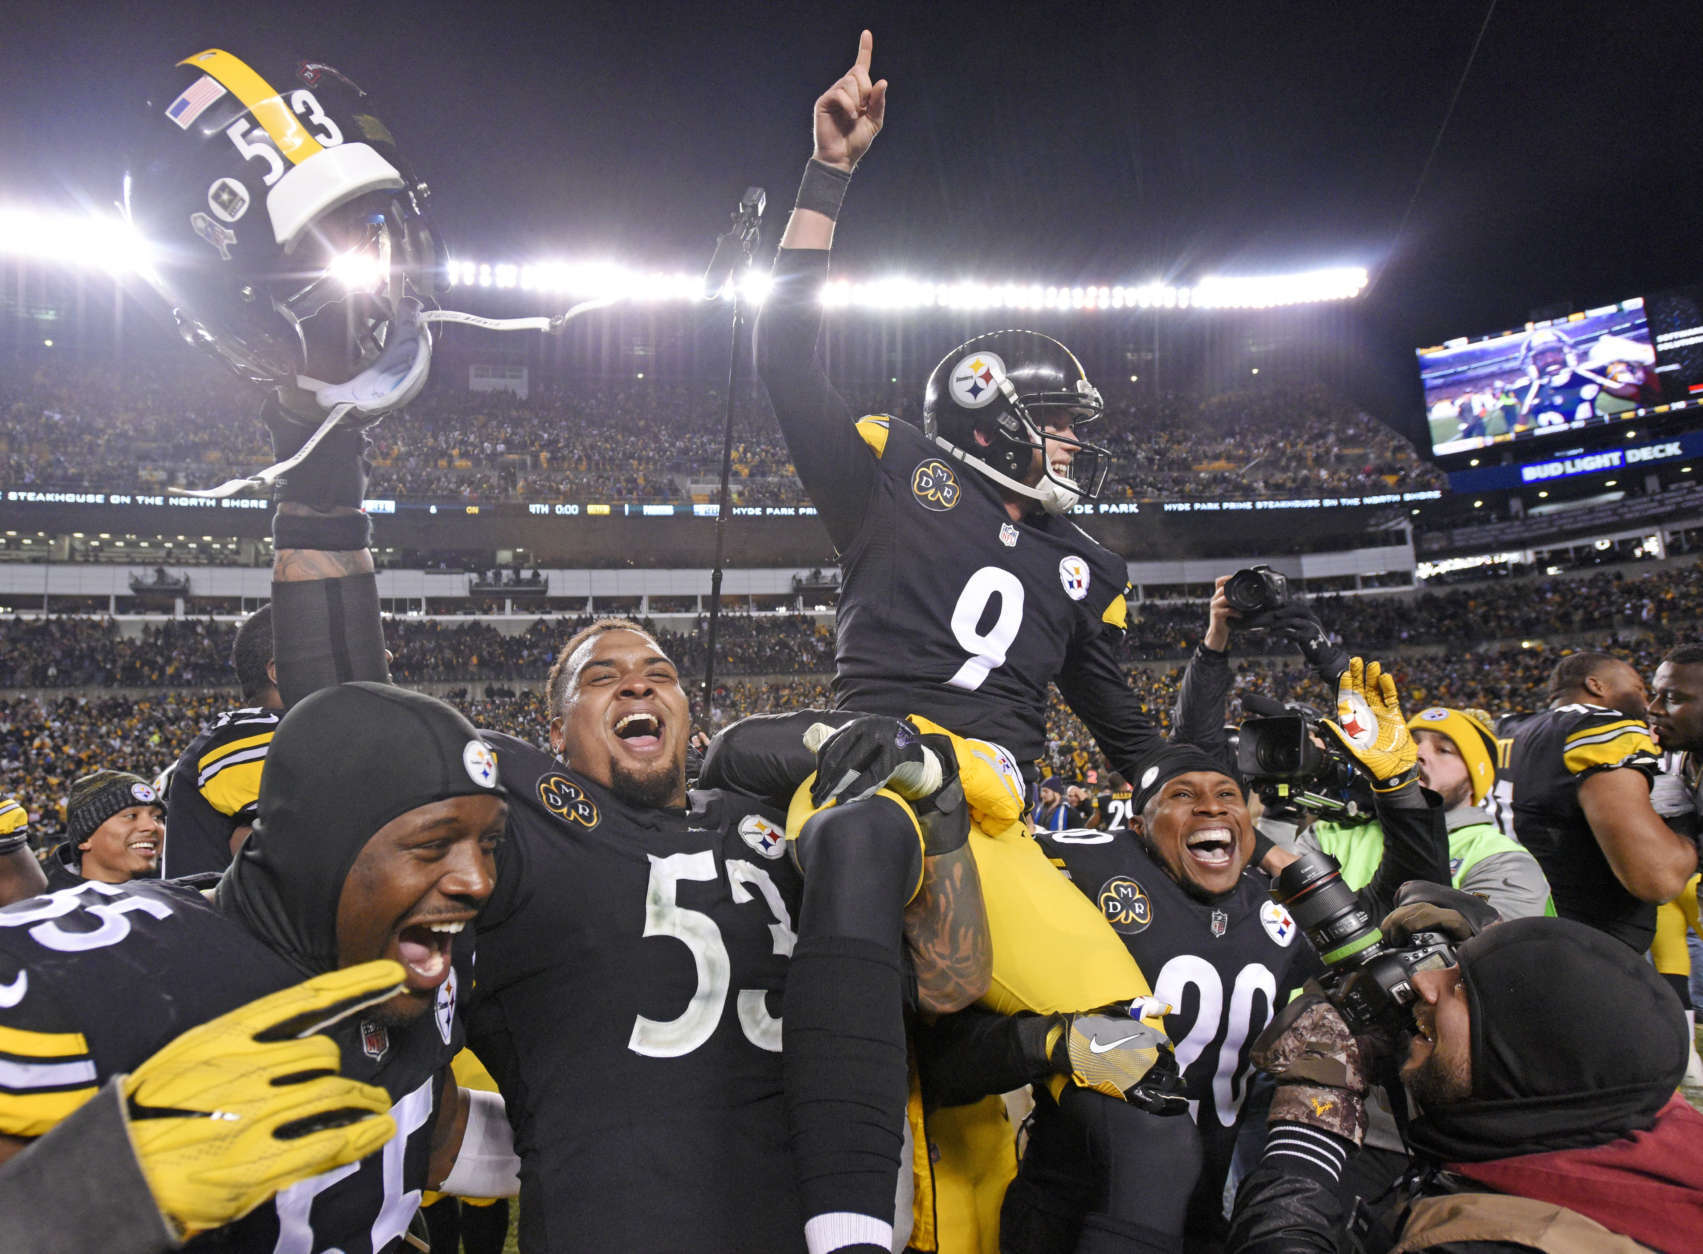 Pittsburgh Steelers kicker Chris Boswell (9) is carried off the field after kicking the game-winning field goal during the second half of an NFL football game against the Green Bay Packers in Pittsburgh, Sunday, Nov. 26, 2017. The Steelers won 31-28. (AP Photo/Don Wright)